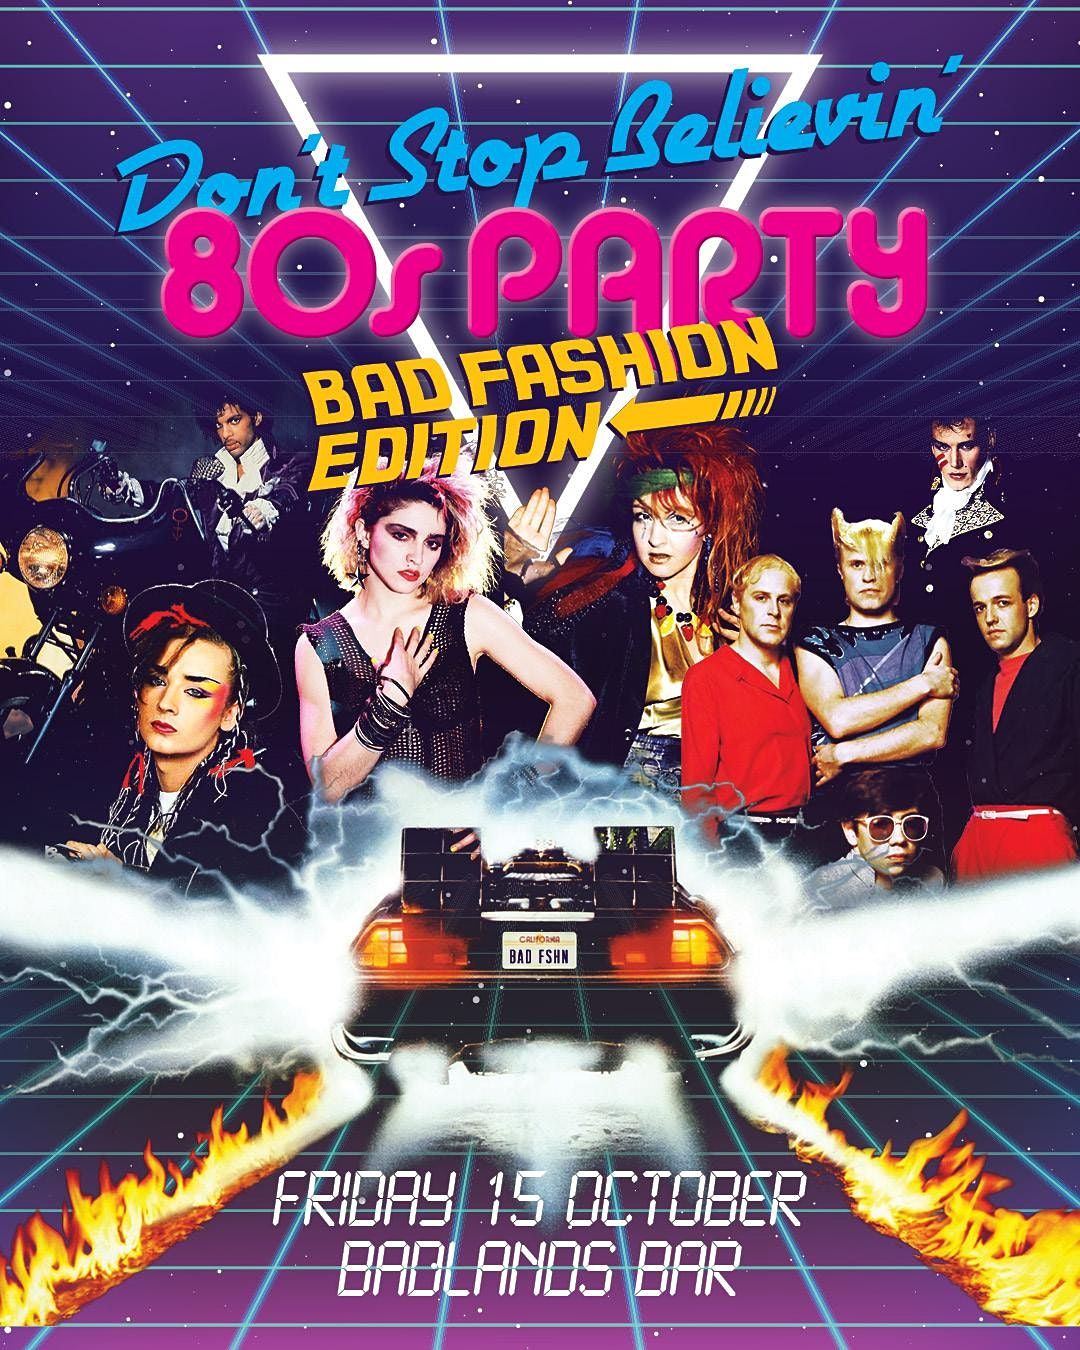 Don't Stop Believin' - 80s Party - Bad Fashion Edition